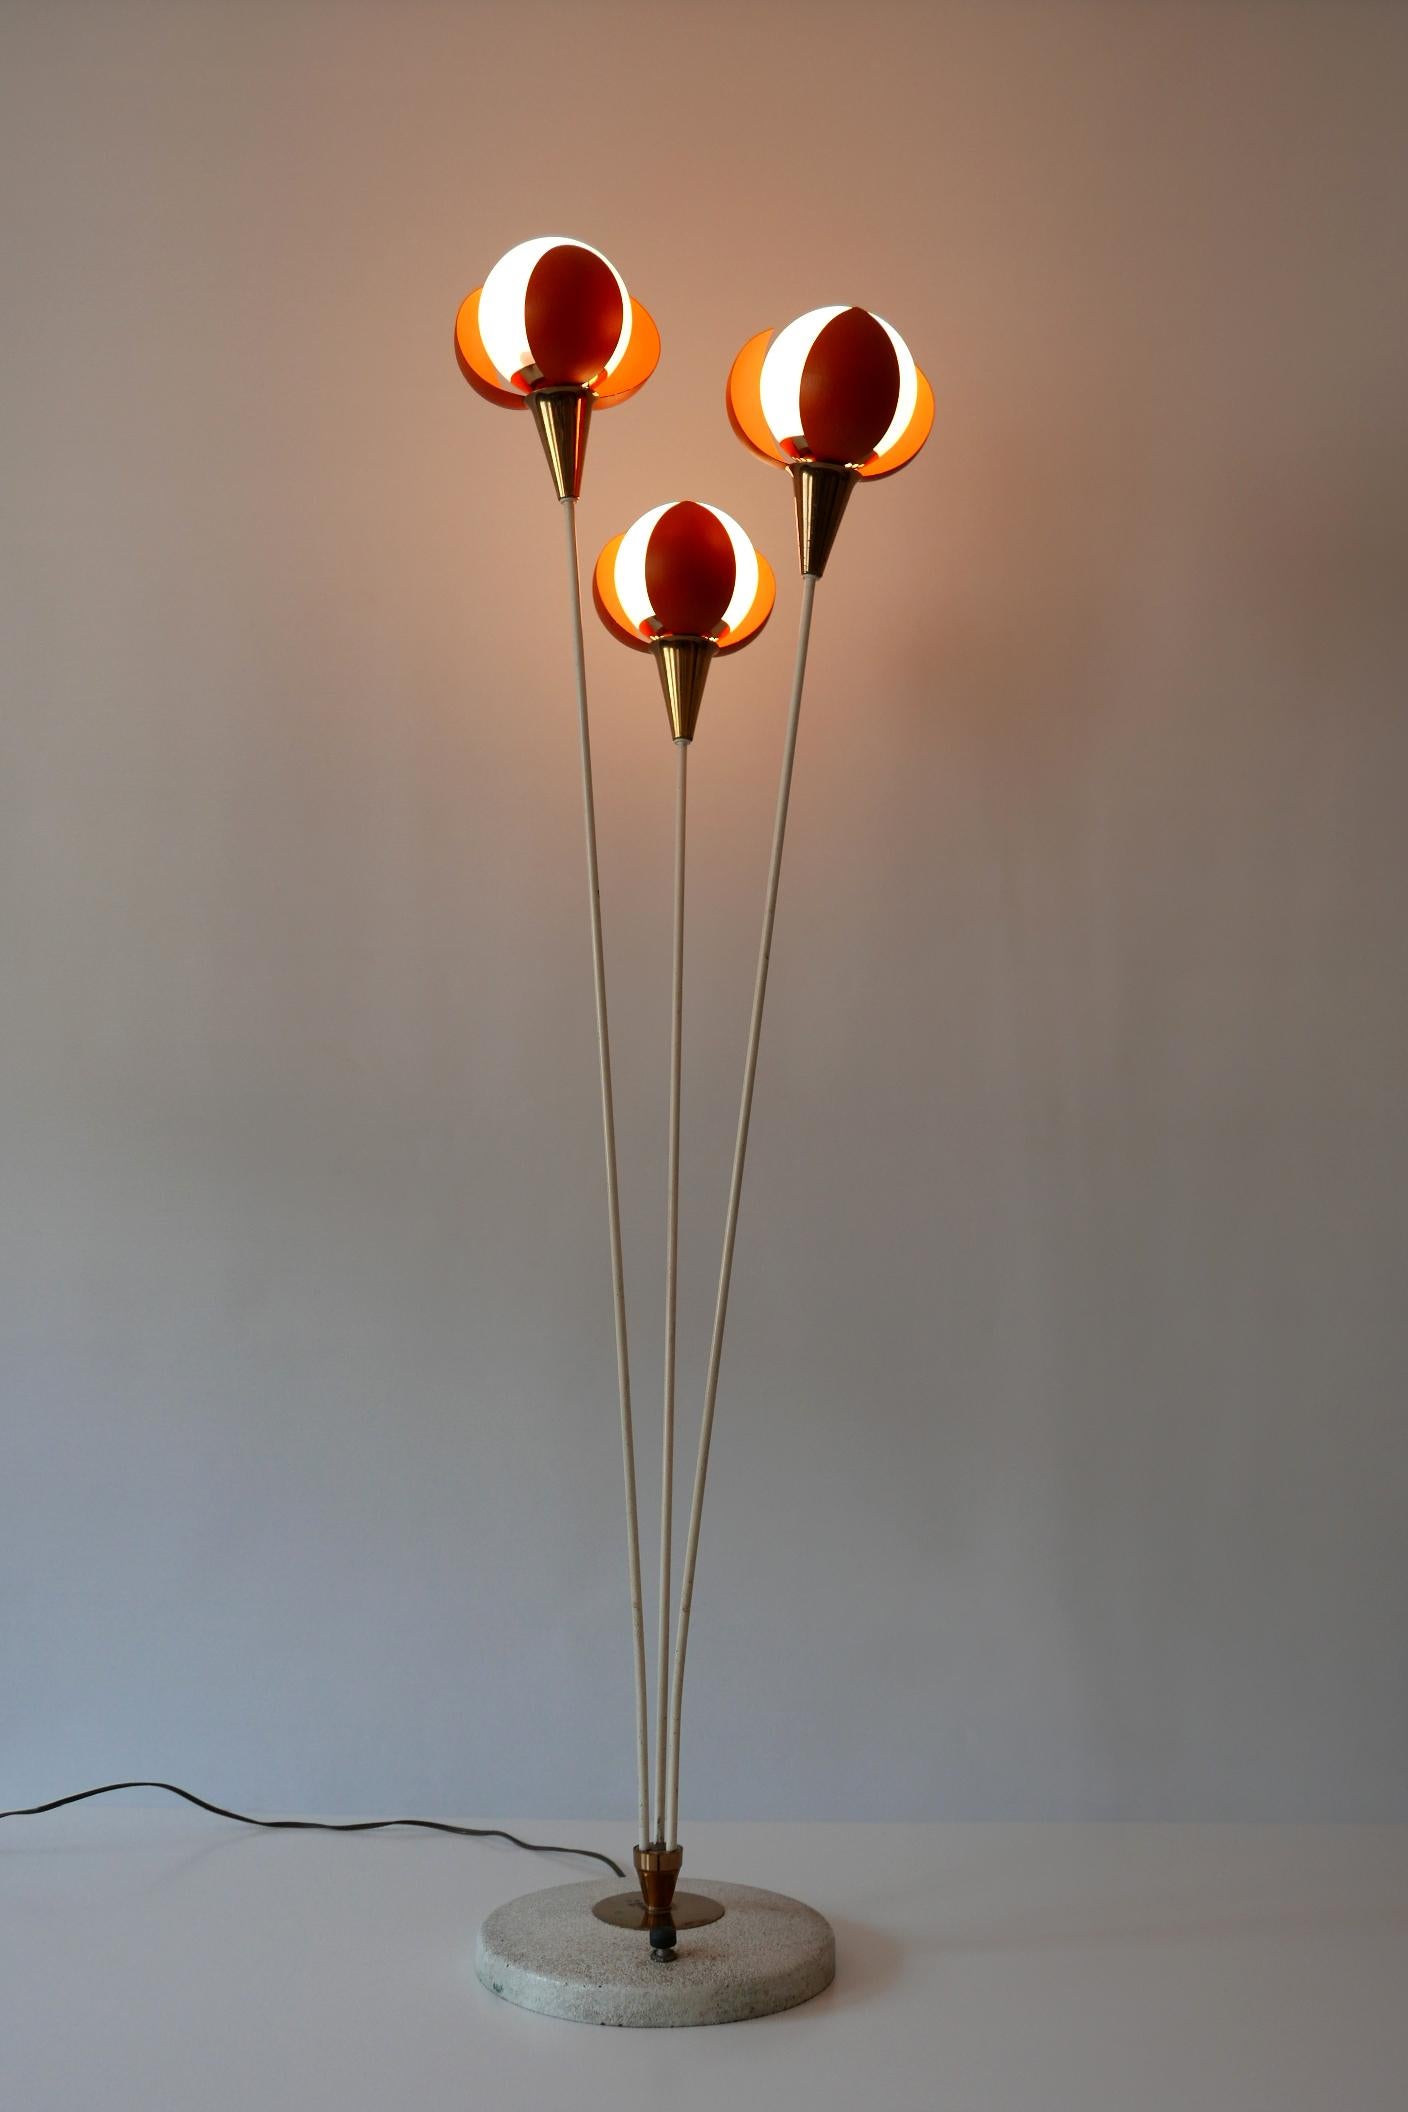 Cast Amazing Mid-Century Modern Three-Flamed Floor Lamp Buds, 1950s, France For Sale